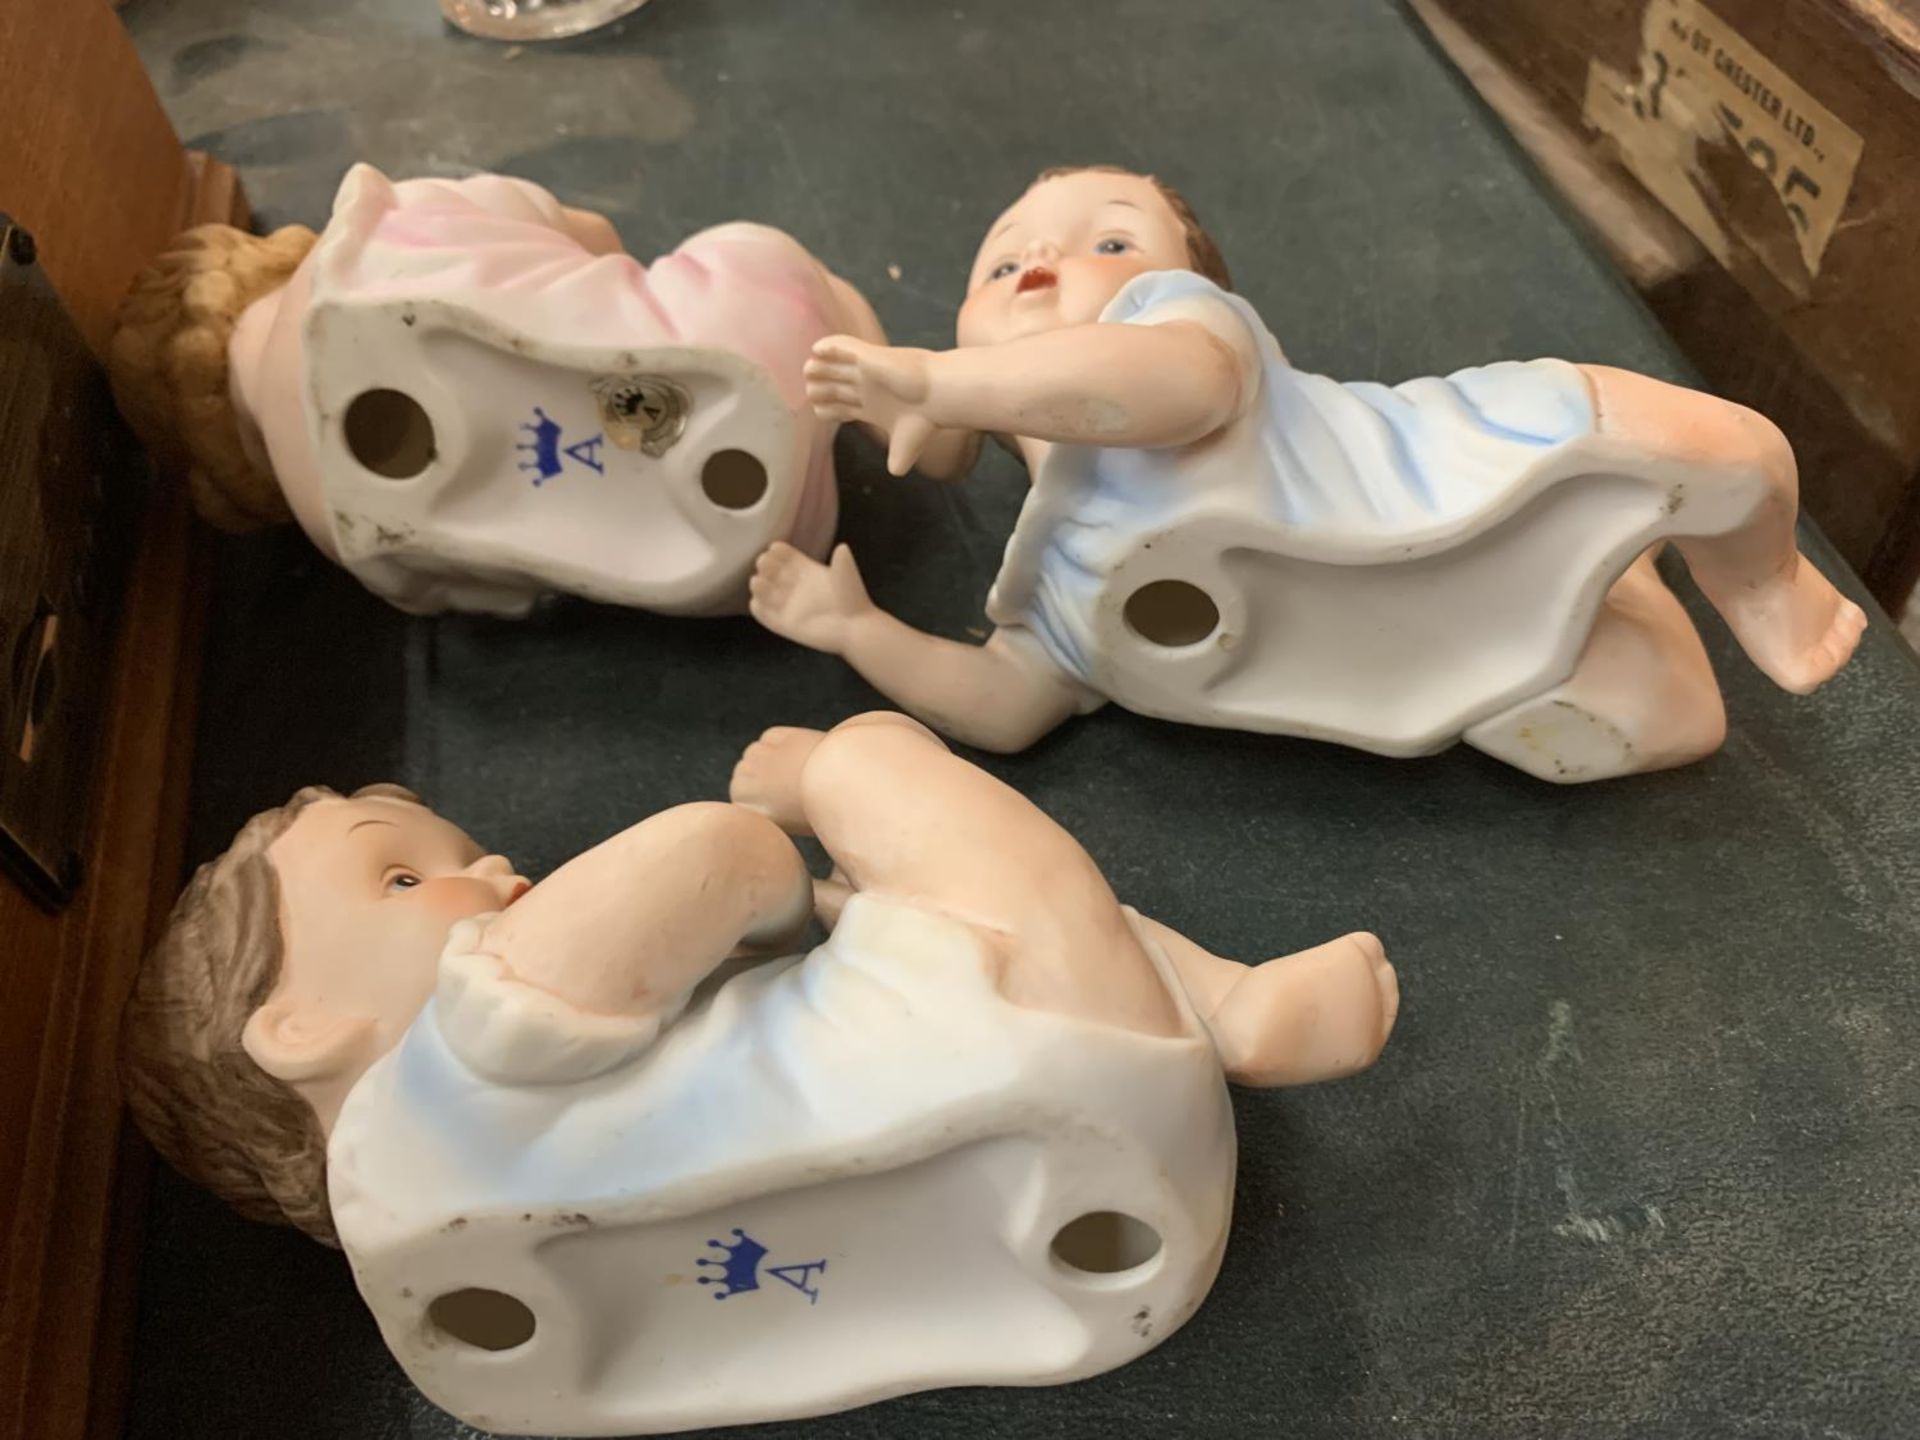 THREE PORCELAIN PIANO BABIES - Image 3 of 3